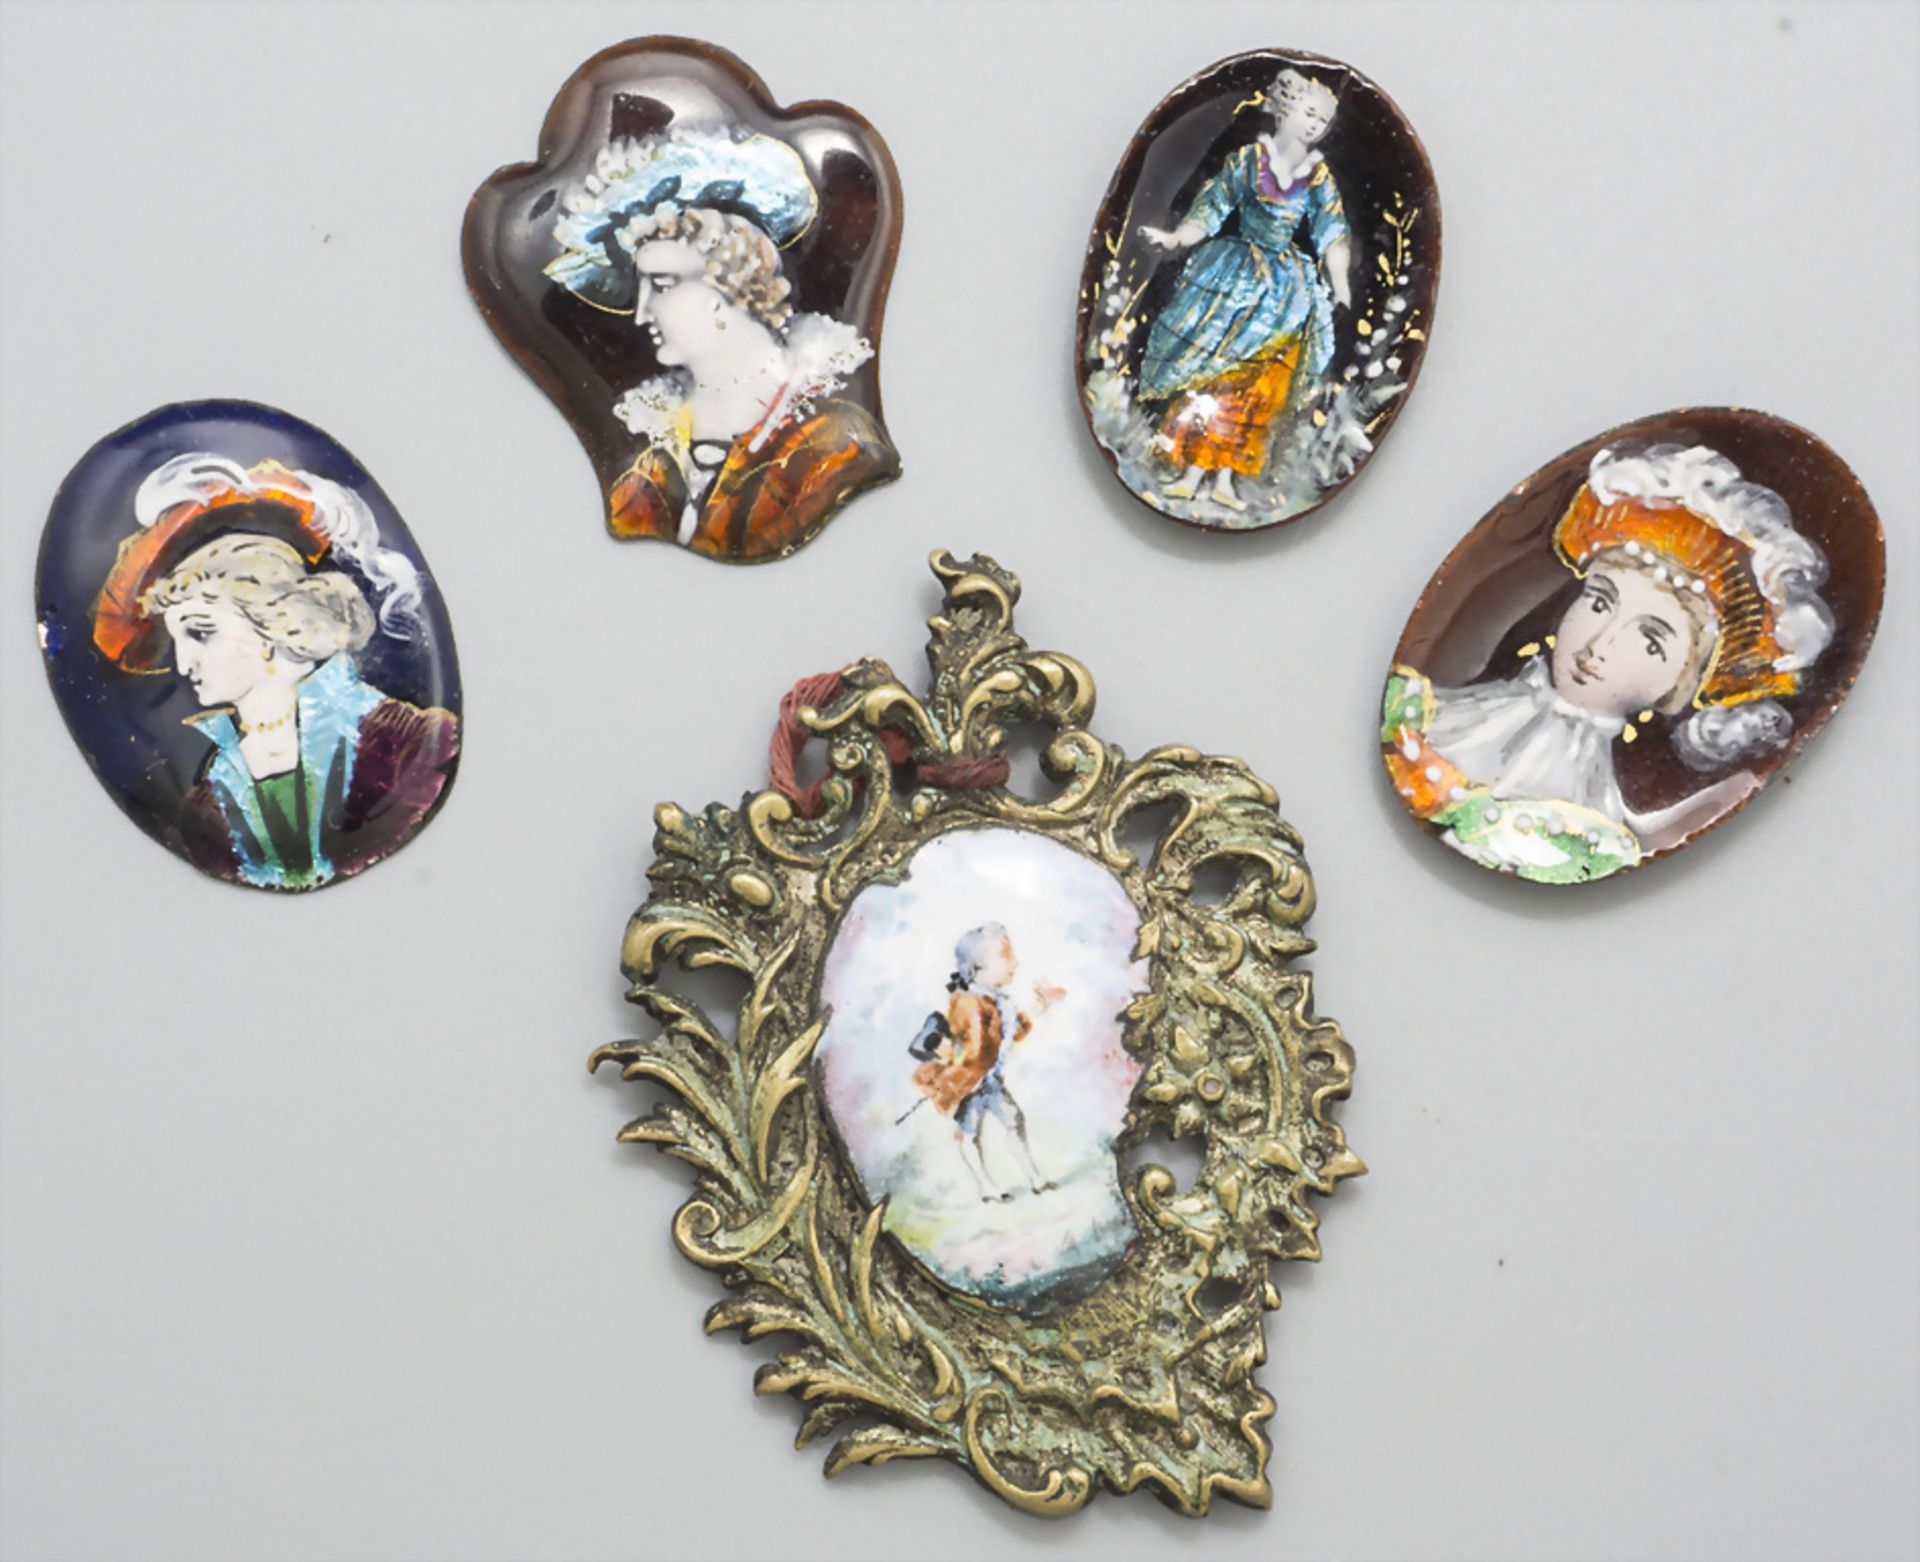 5 Email-Plättchen / 5 enamelled plaques, wohl Frankreich, Mitte 19. Jh.